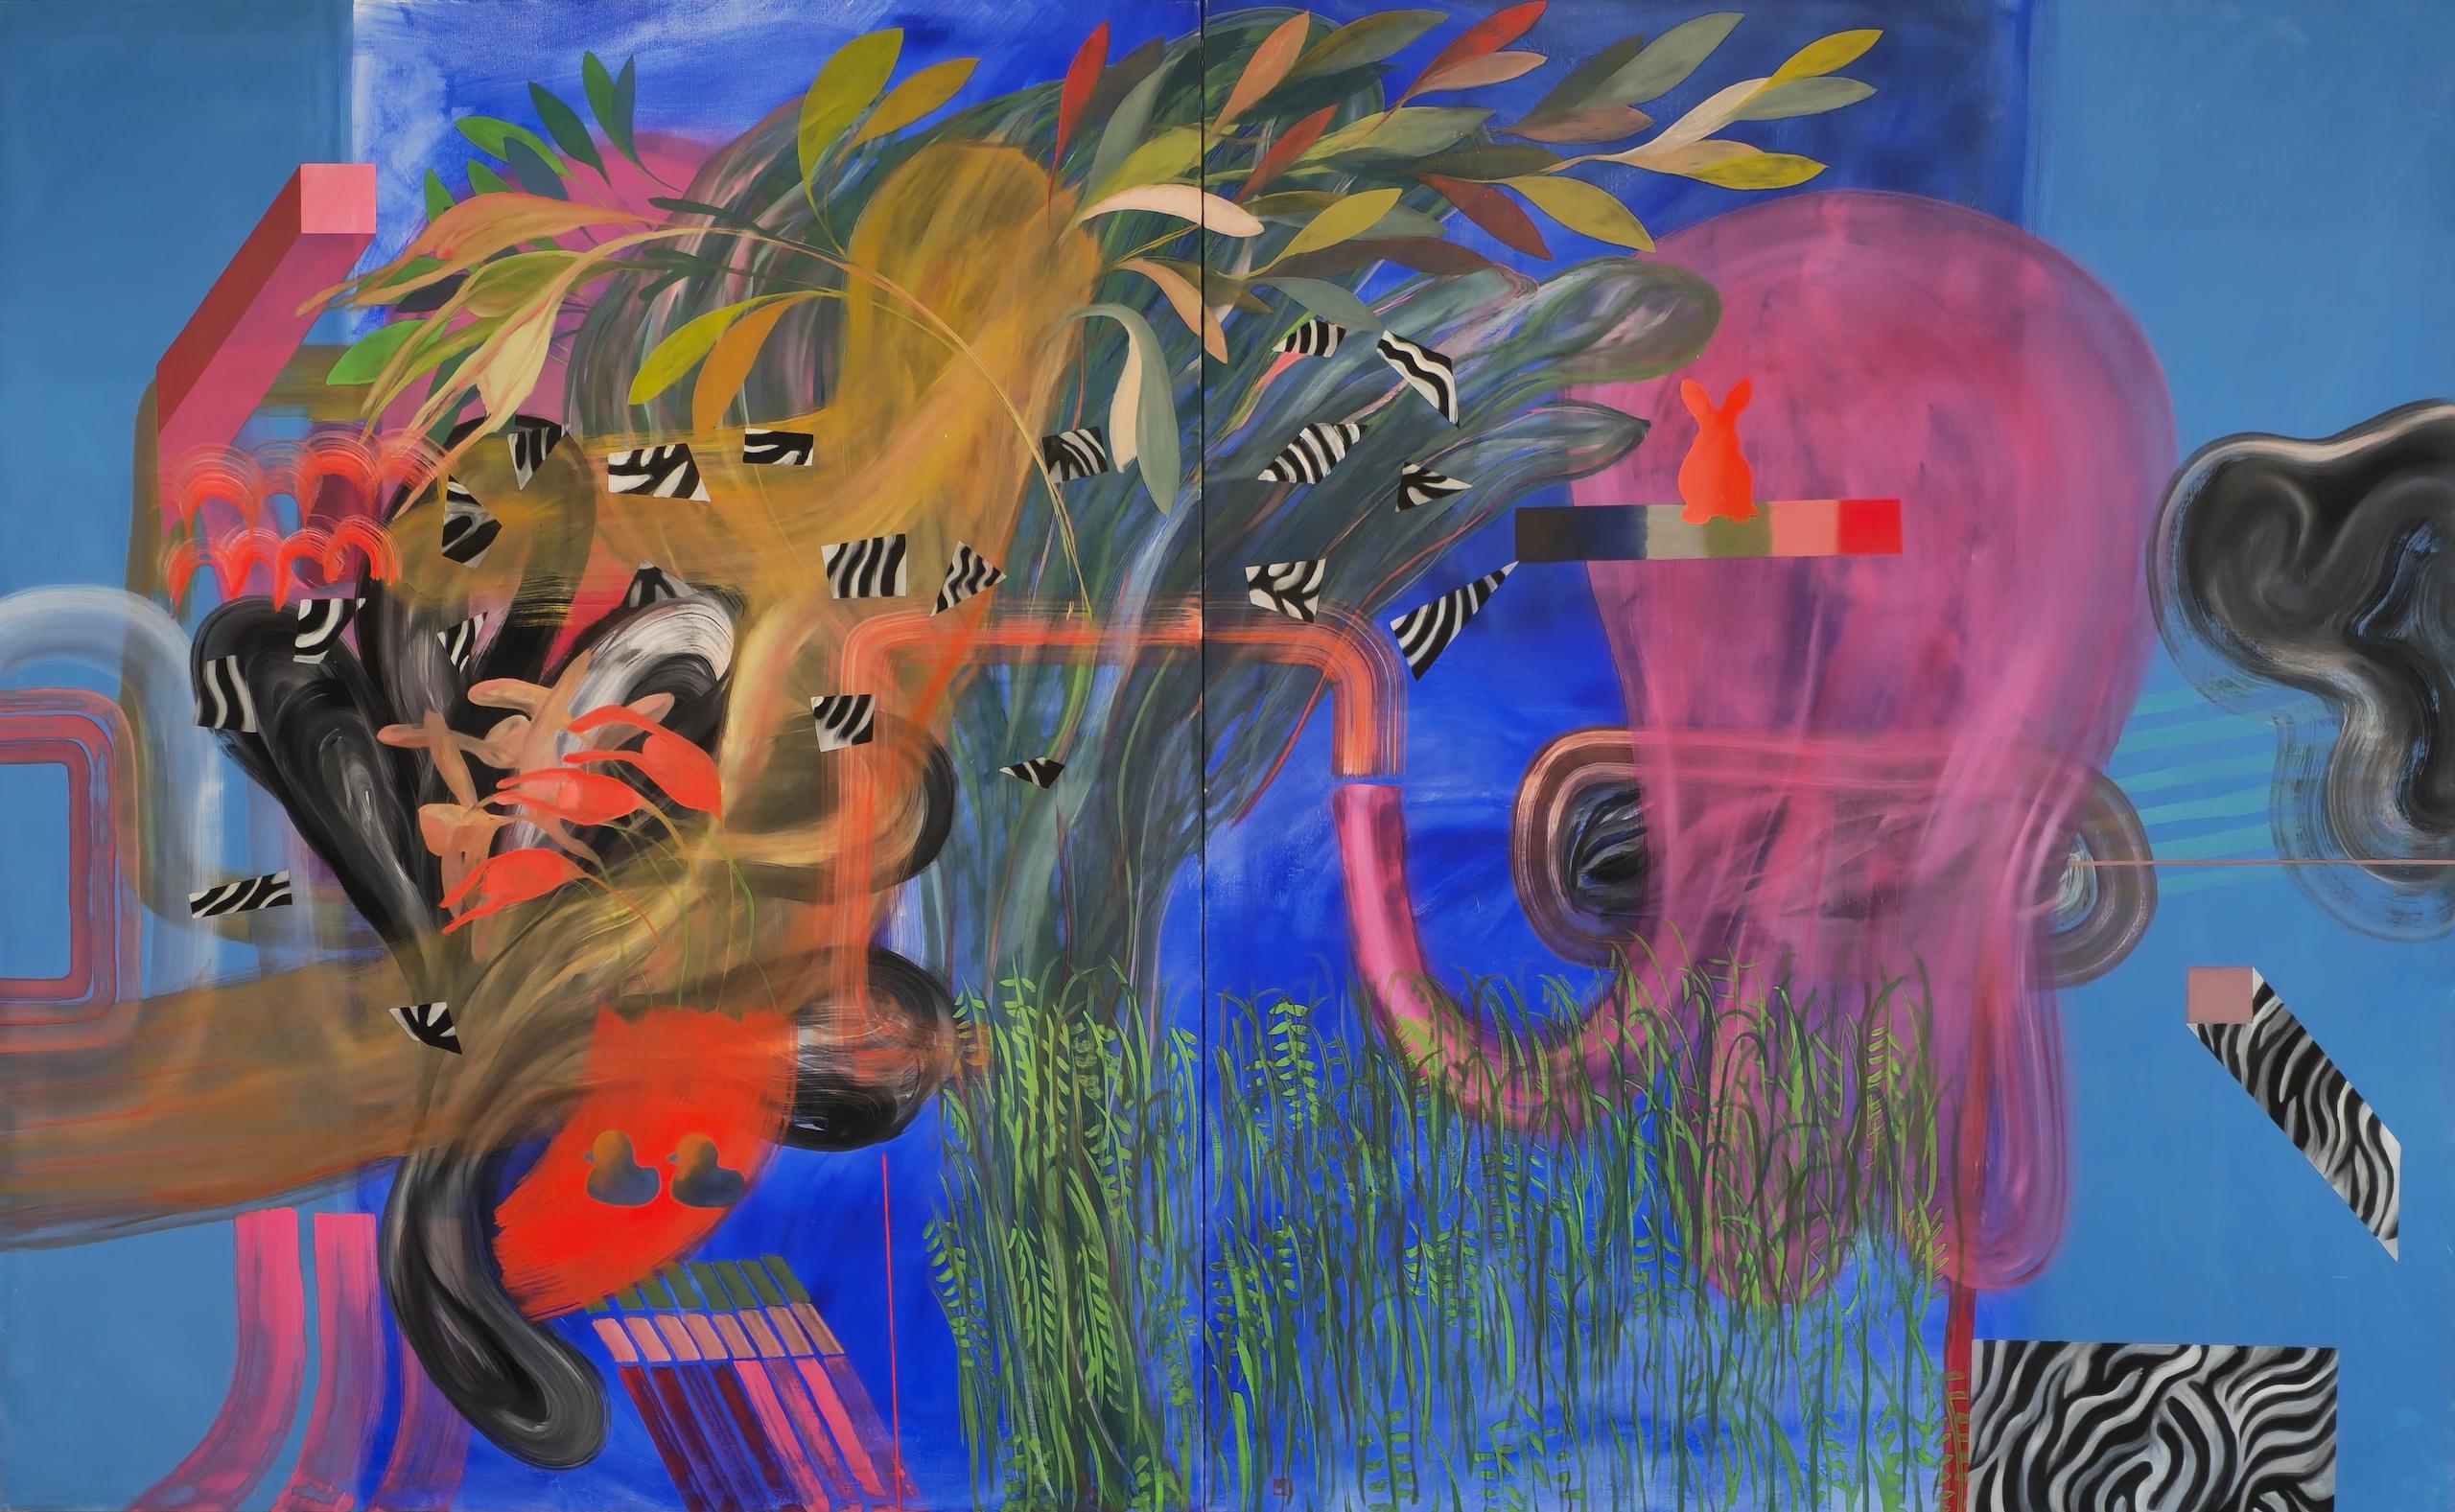 GROWING UP (#11) is a unique oil on canvas diptych painting by contemporary artist Zoran Šimunović, dimensions are 180 × 290 cm (70.9 × 114.2 in). The artwork is sold unframed.
The artwork is signed and comes with a certificate of authenticity.